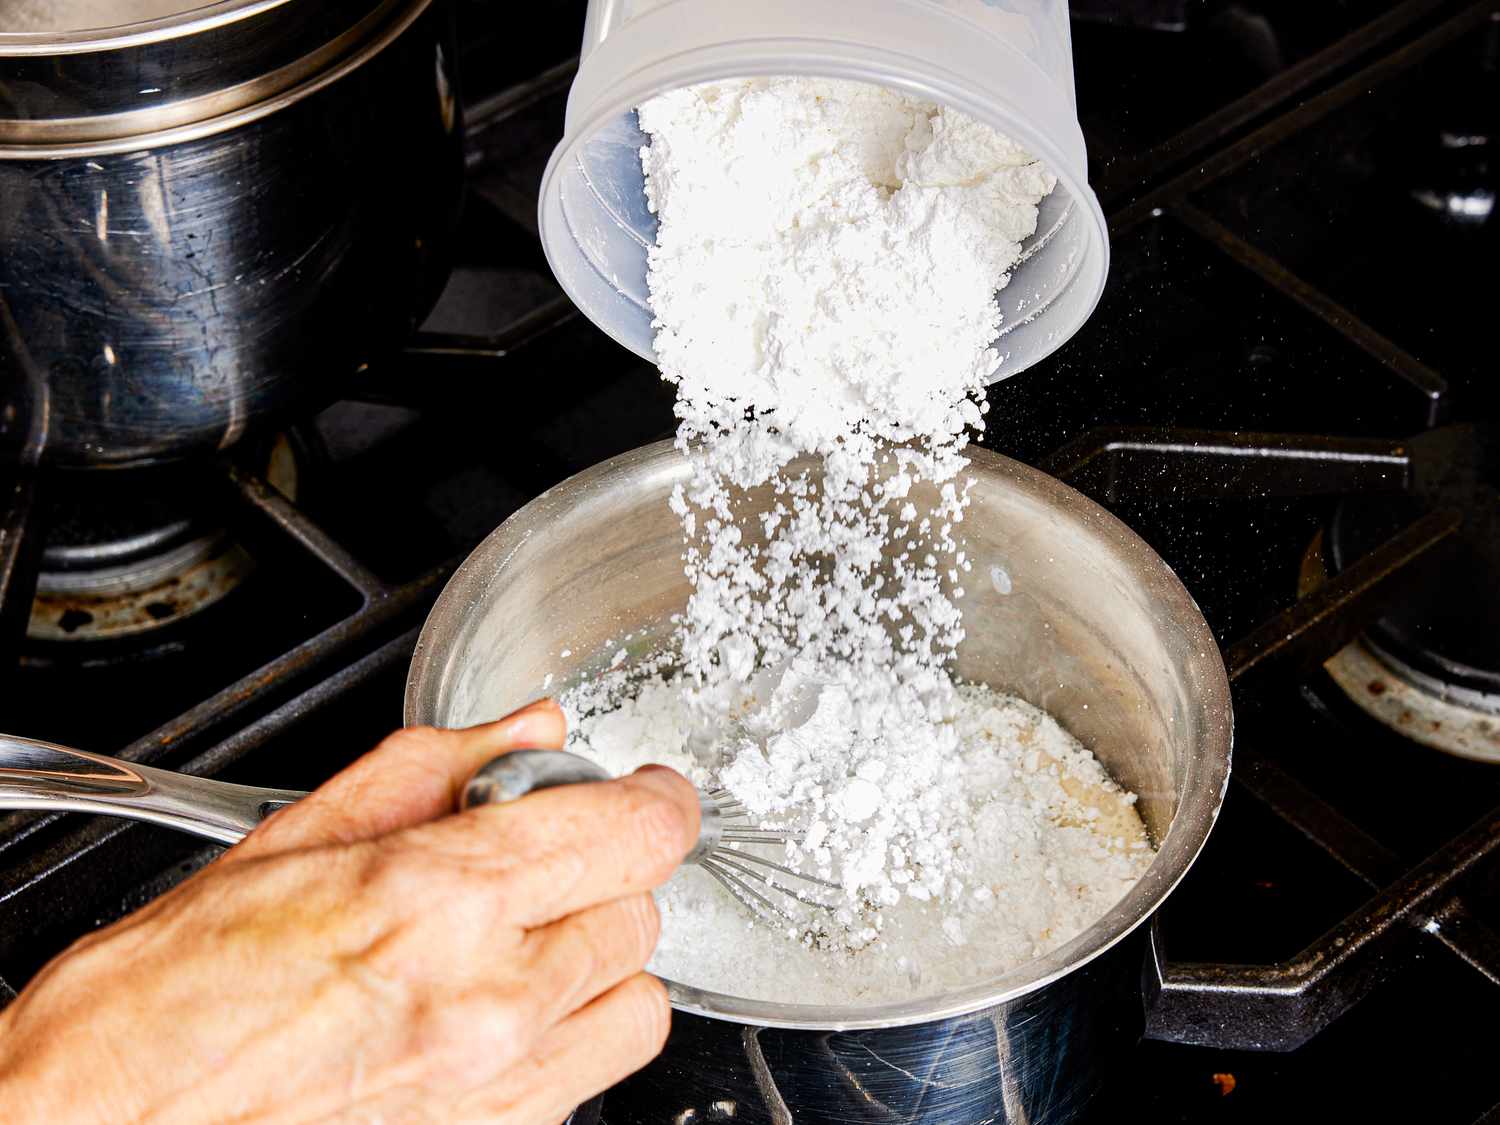 Overhead view of pouring sugar into a pot